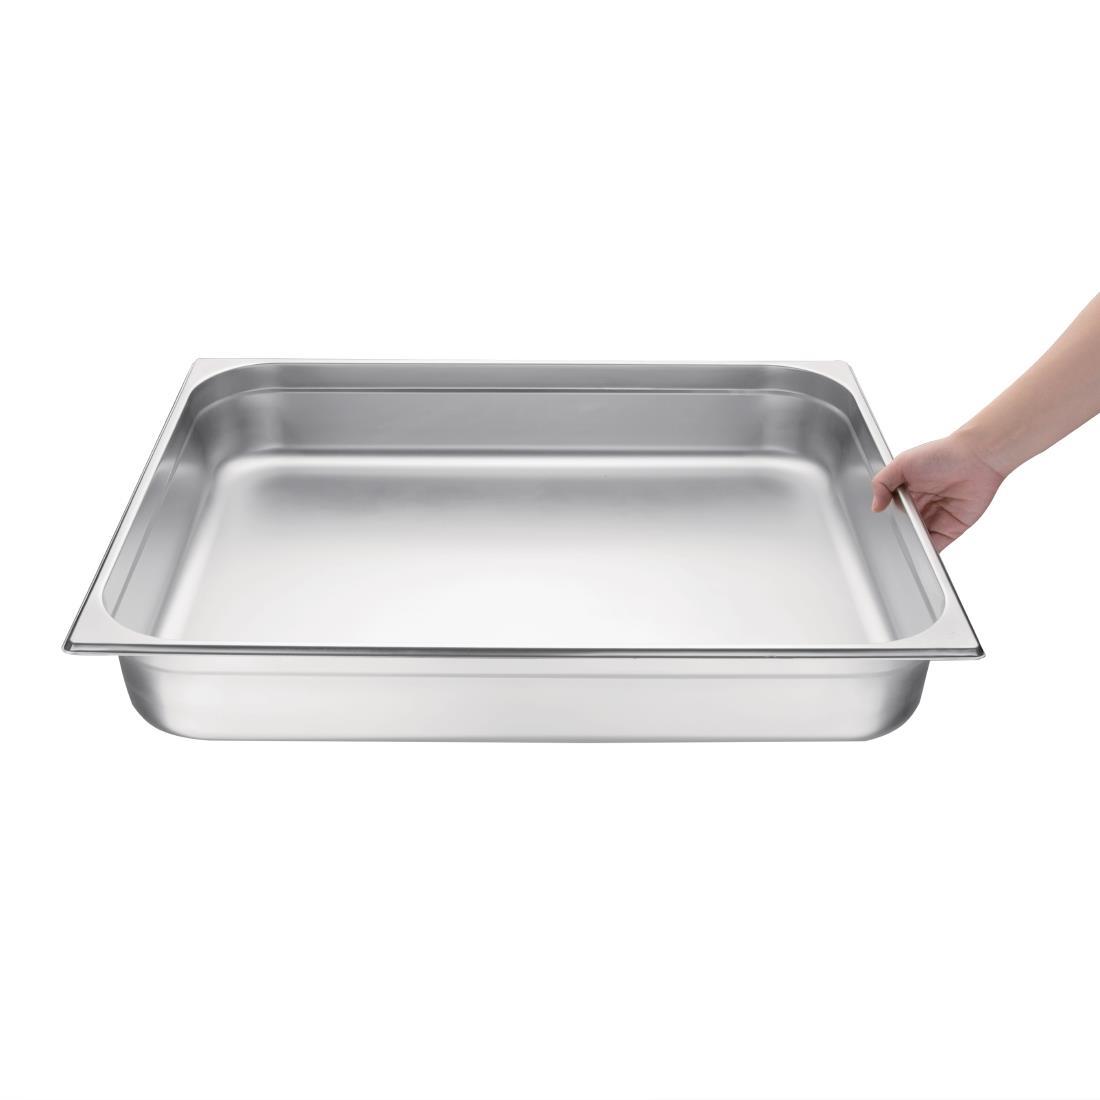 Vogue Stainless Steel 2/1 Gastronorm Pan 100mm - K804  - 5